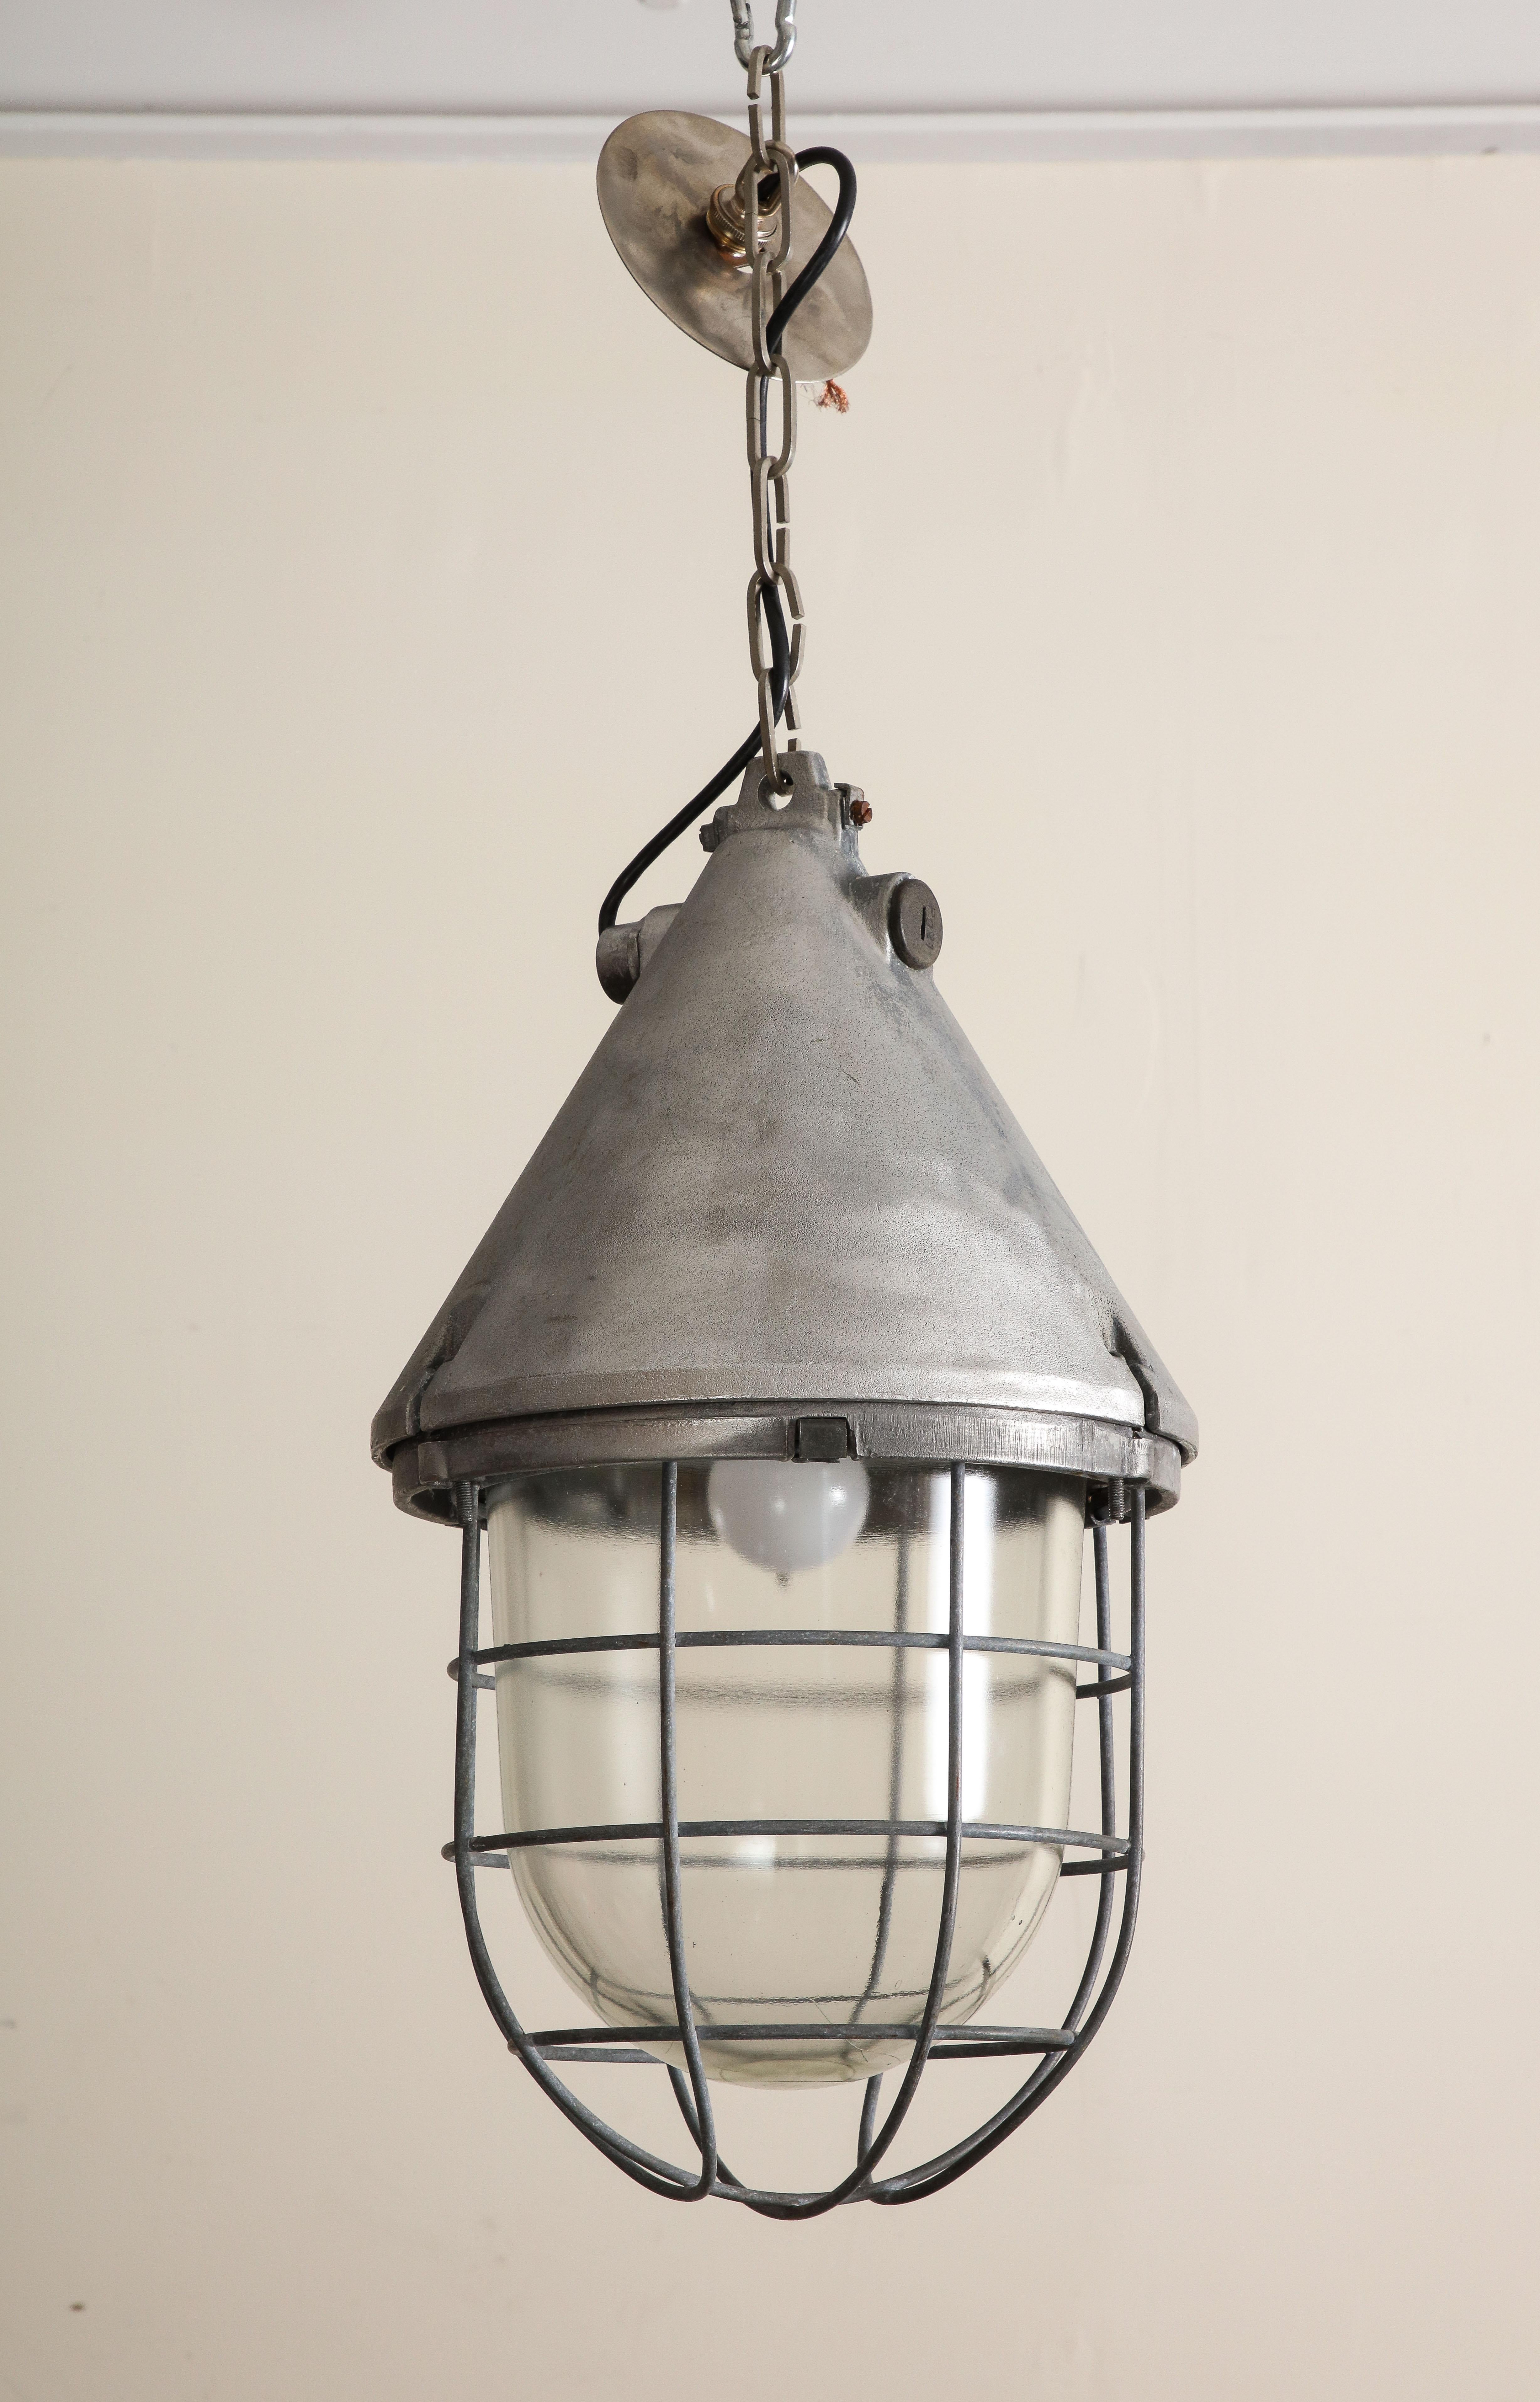 Pair of Vintage Industrial Cast Iron Cage Pendant Lights, C. 1920 For Sale 11